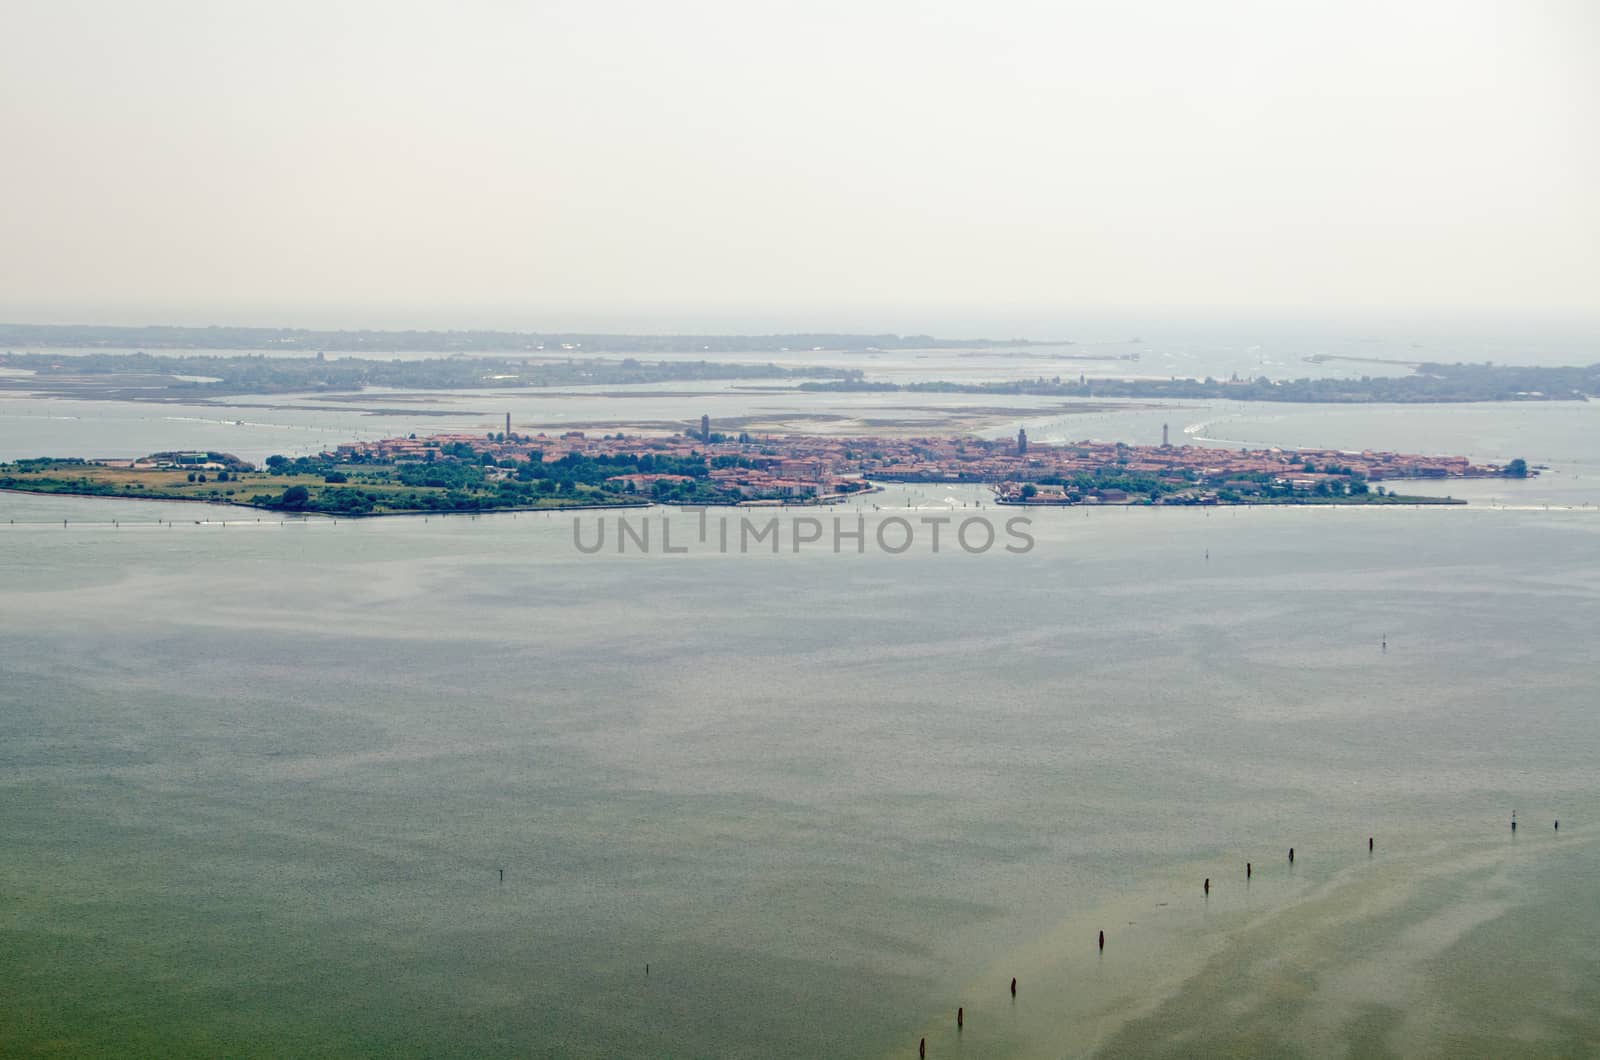 Aerial view of the Venetian Lagoon with the island of Murano to the fore and behind it the less populated Le Vignole and Saint'Erasmo with the Adriatic Sea beyond.